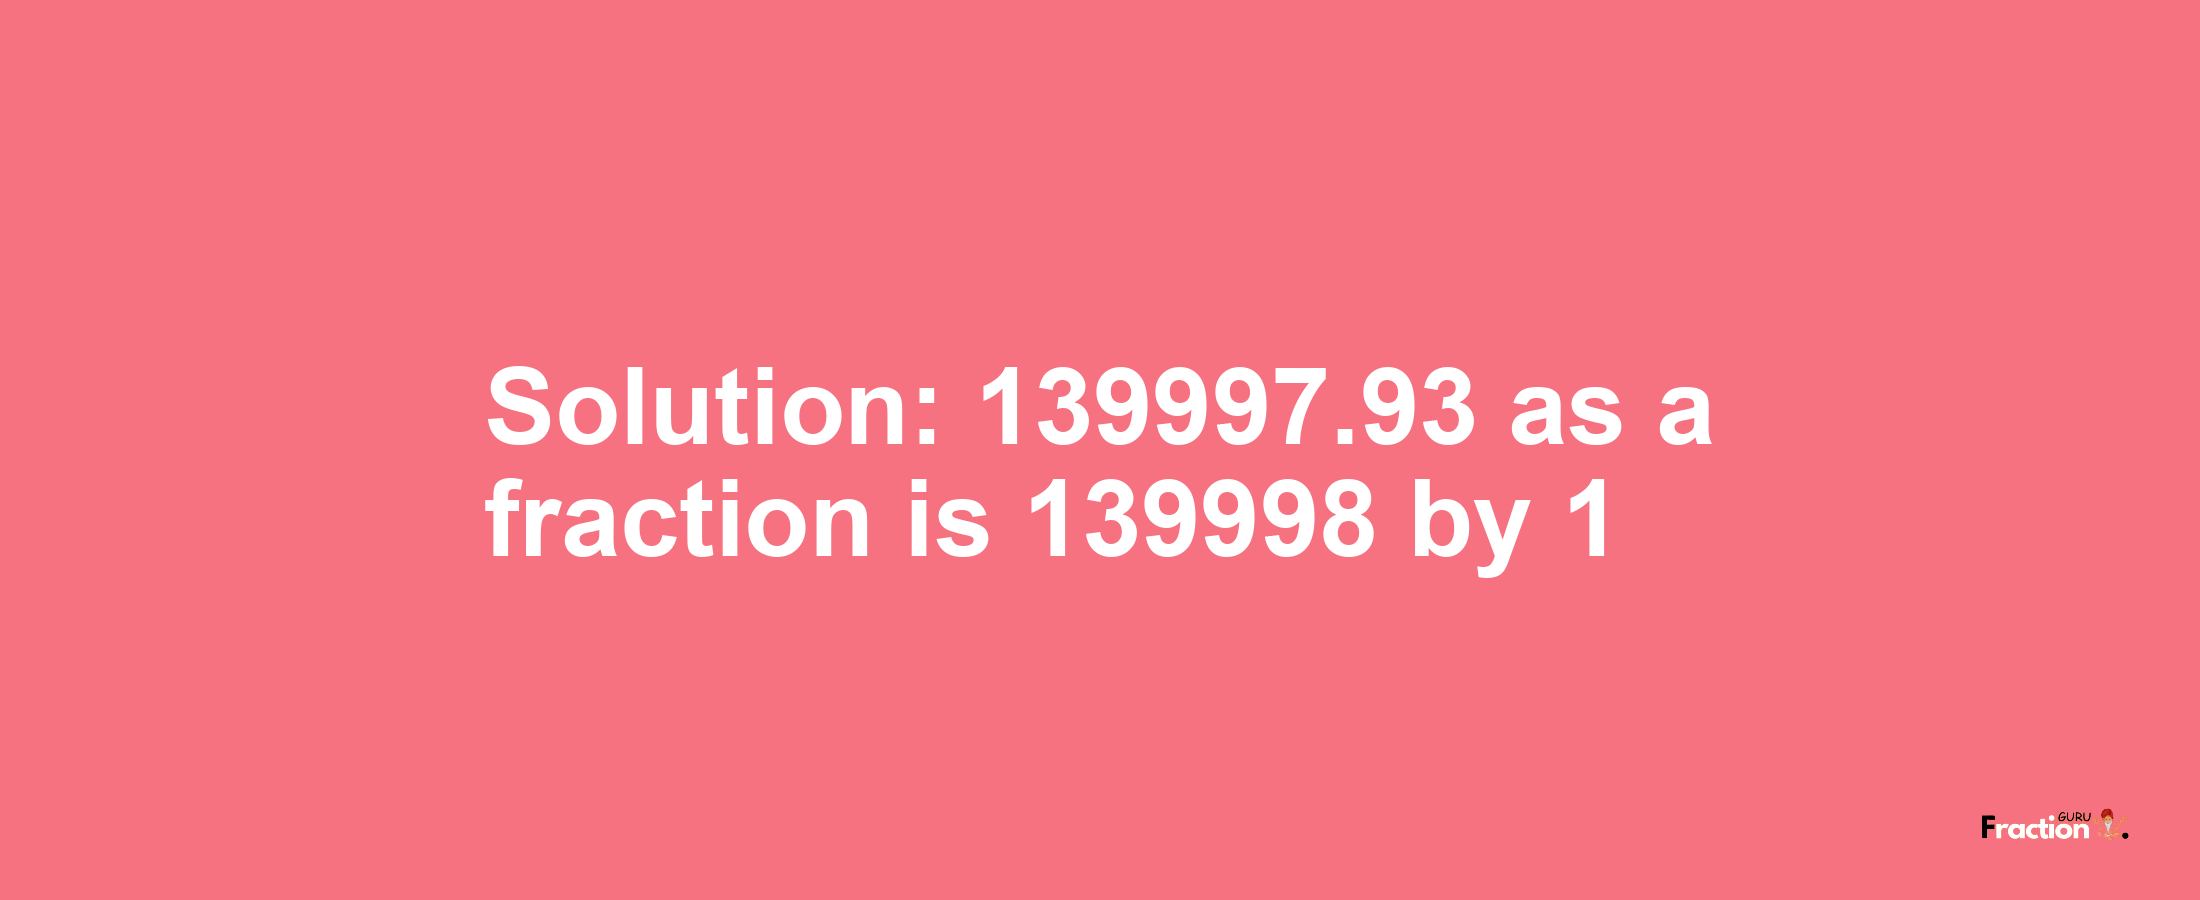 Solution:139997.93 as a fraction is 139998/1